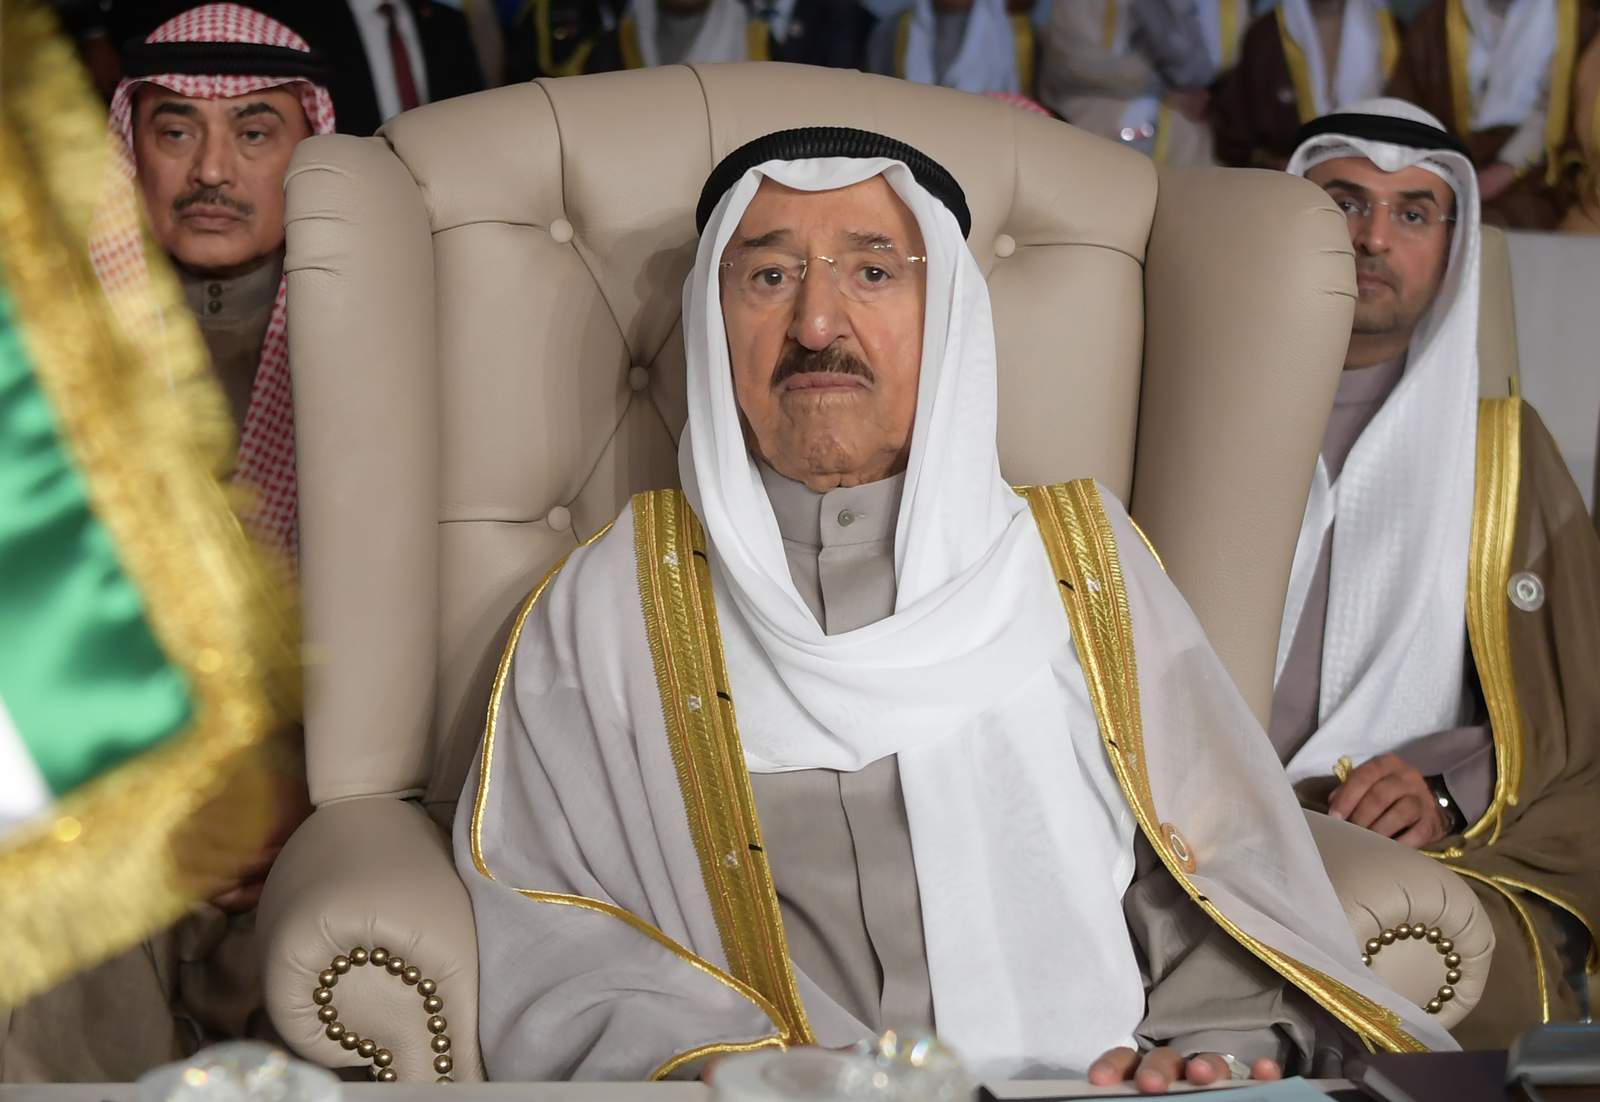 Kuwait's ruler, 91, undergoes surgery as prince empowered